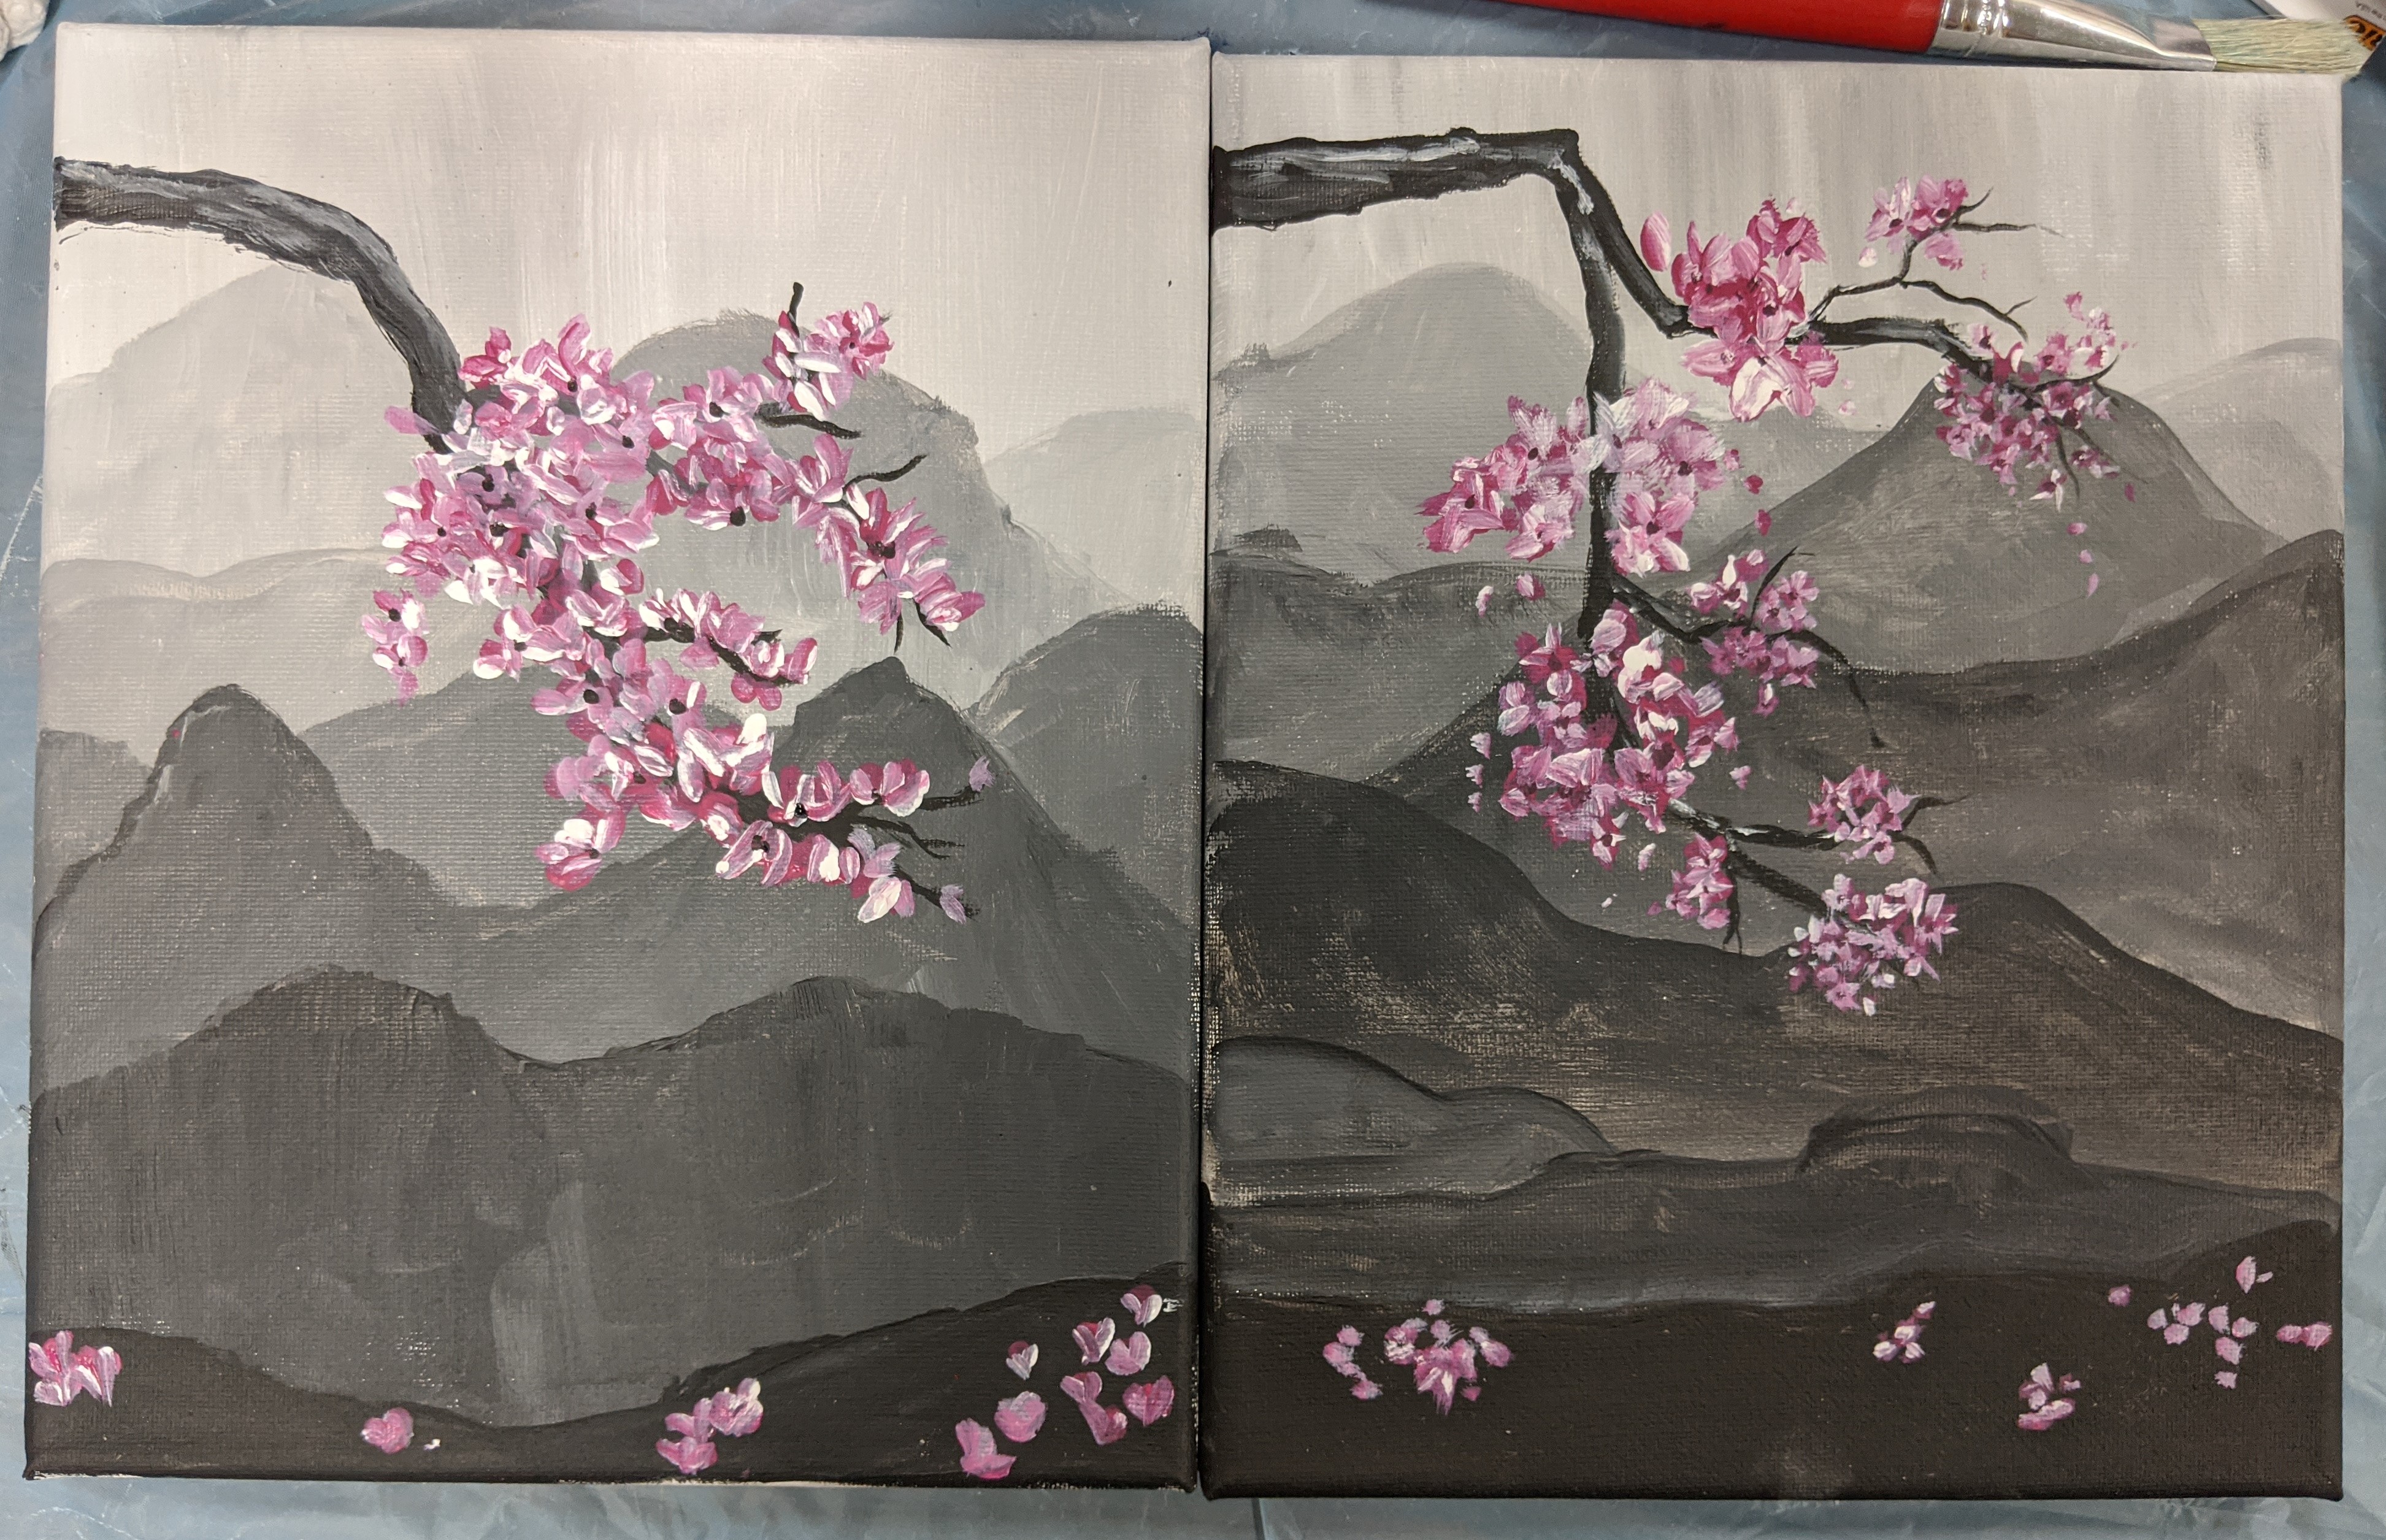 Image of a painting depicting cherry blossoms and mountains